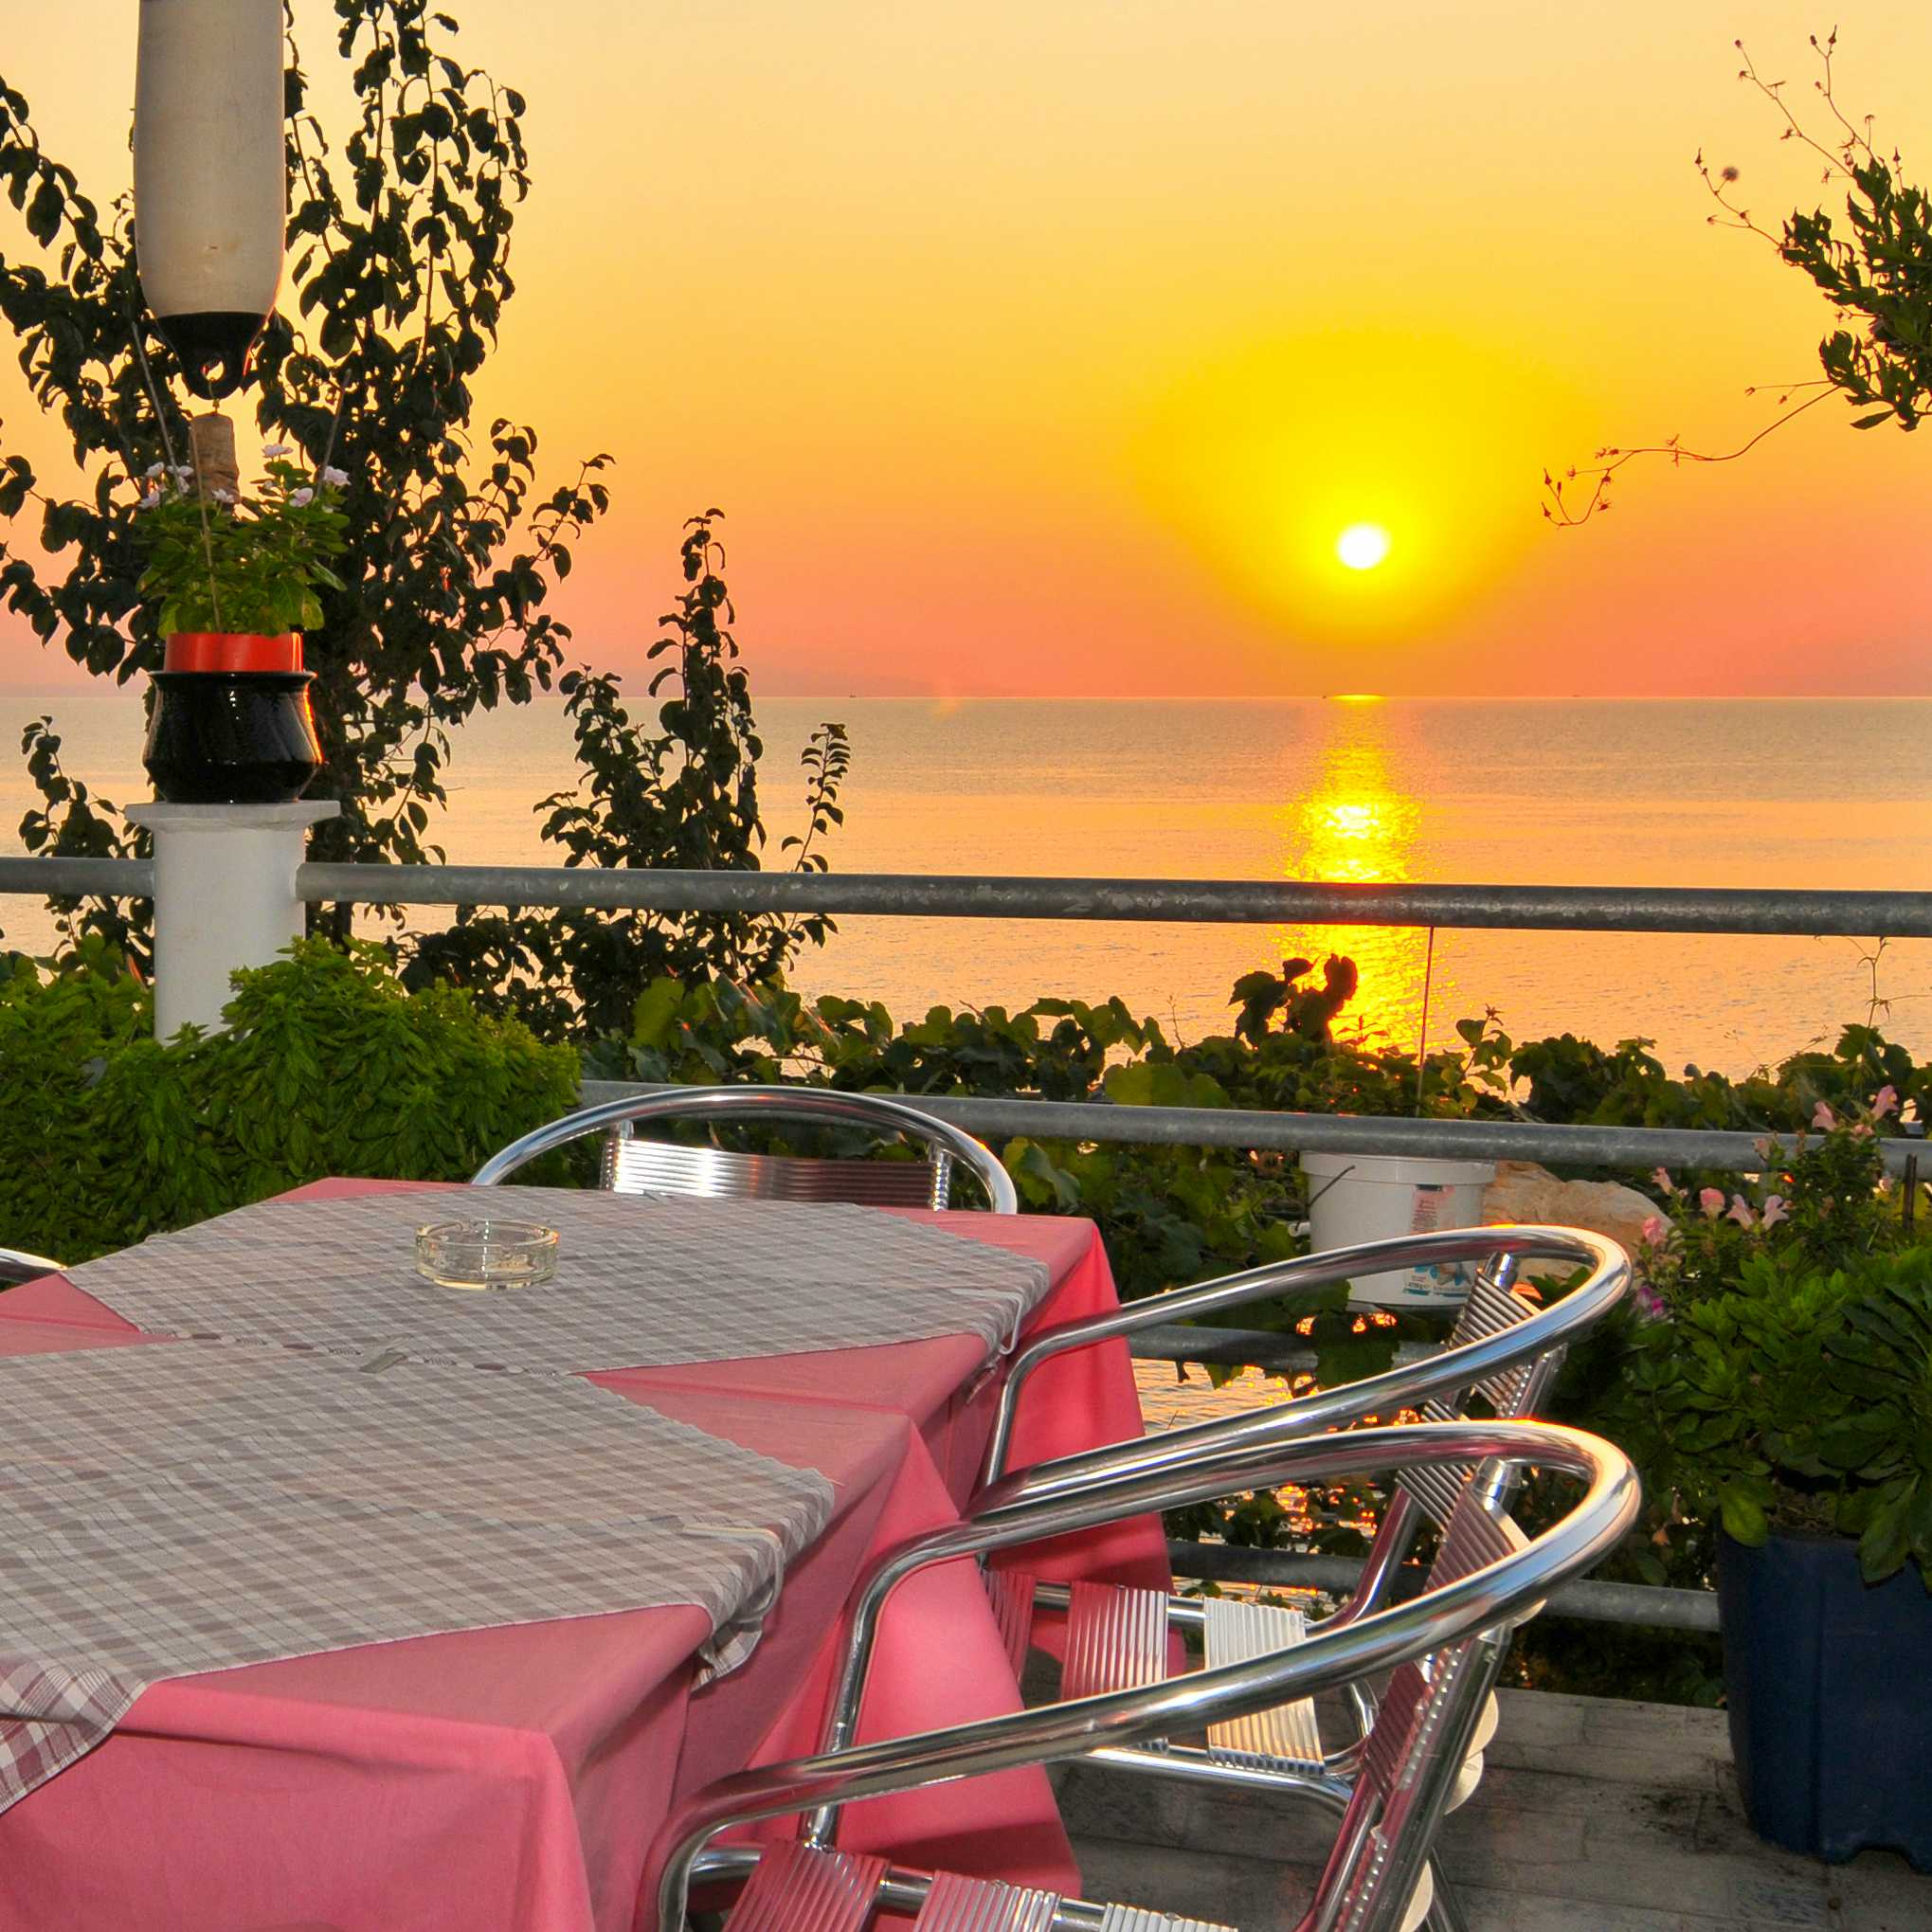 Photo Caption: Watch the sunset and relax at our café-bar